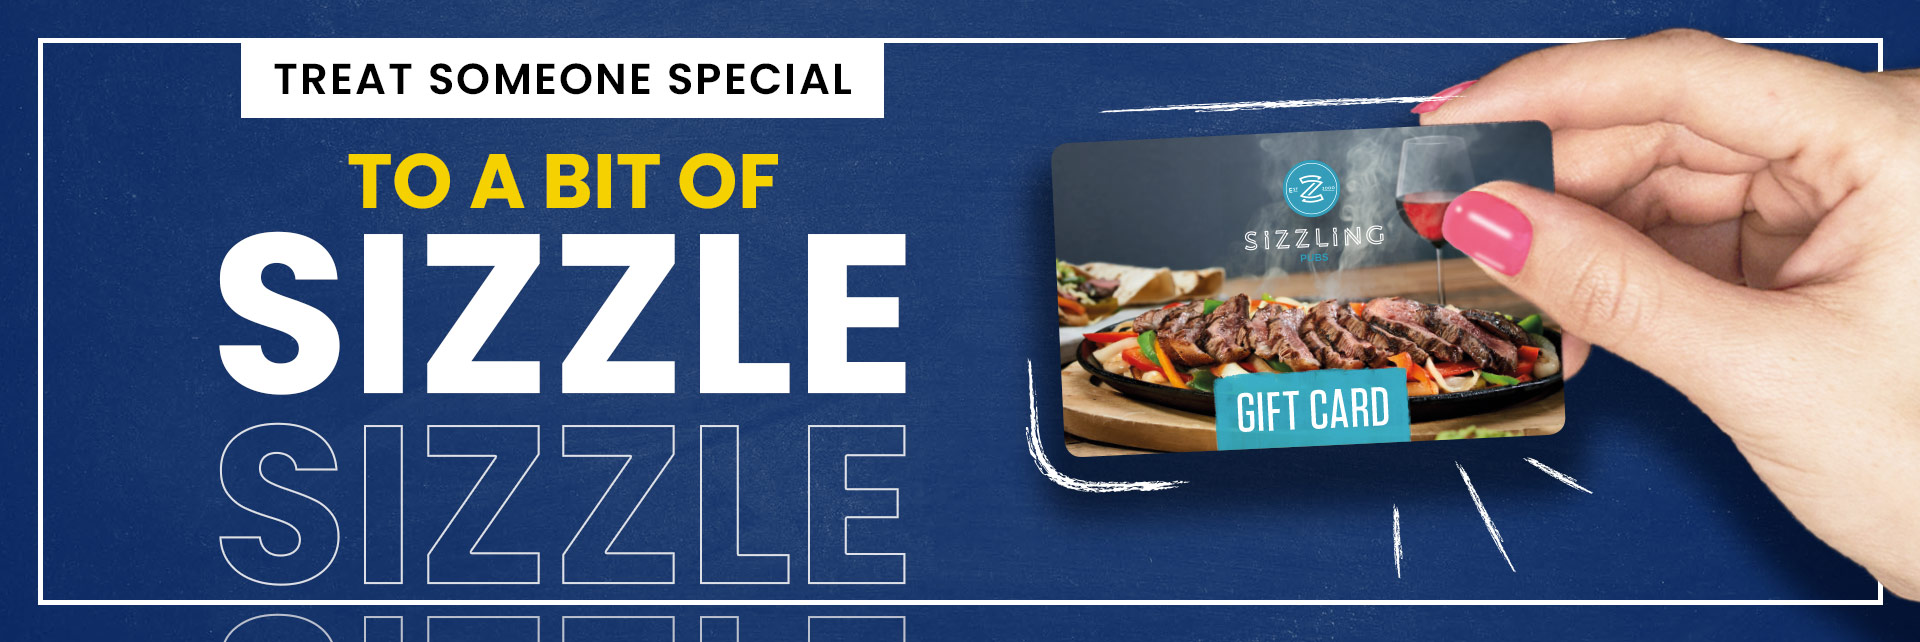 Sizzling Pubs Gift Card at The Three Horse Shoes in Doncaster